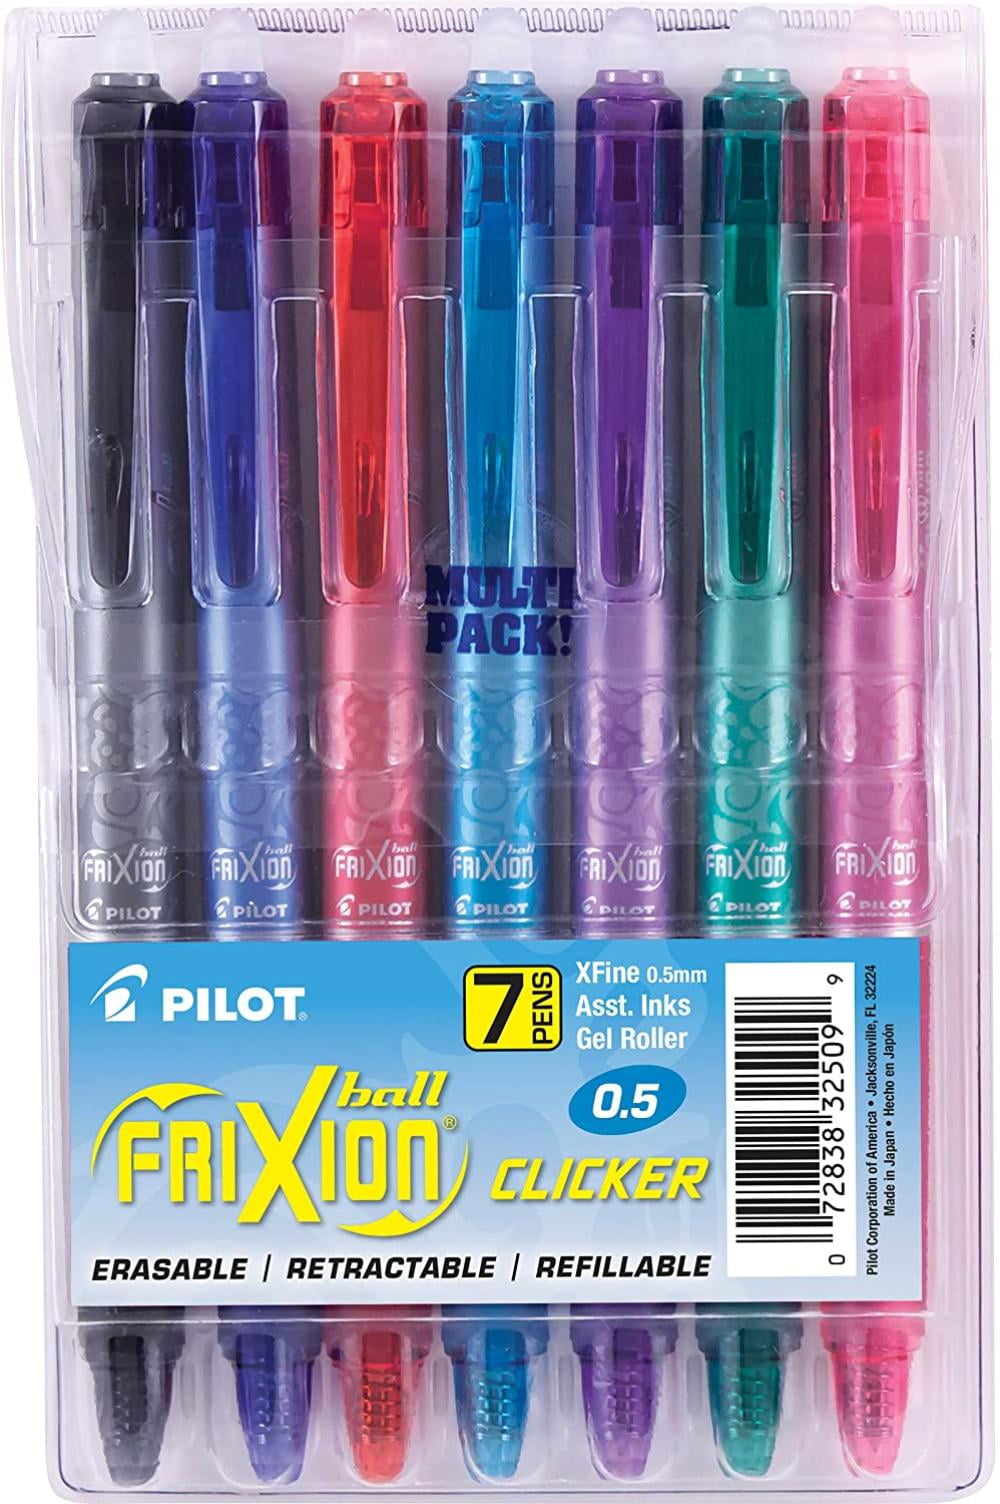 Extra Fine Point Assorted Color Inks 32509 PILOT FriXion Clicker Erasable Refillable & Retractable Gel Ink Pens Pack of 1 7-Pack Pouch 